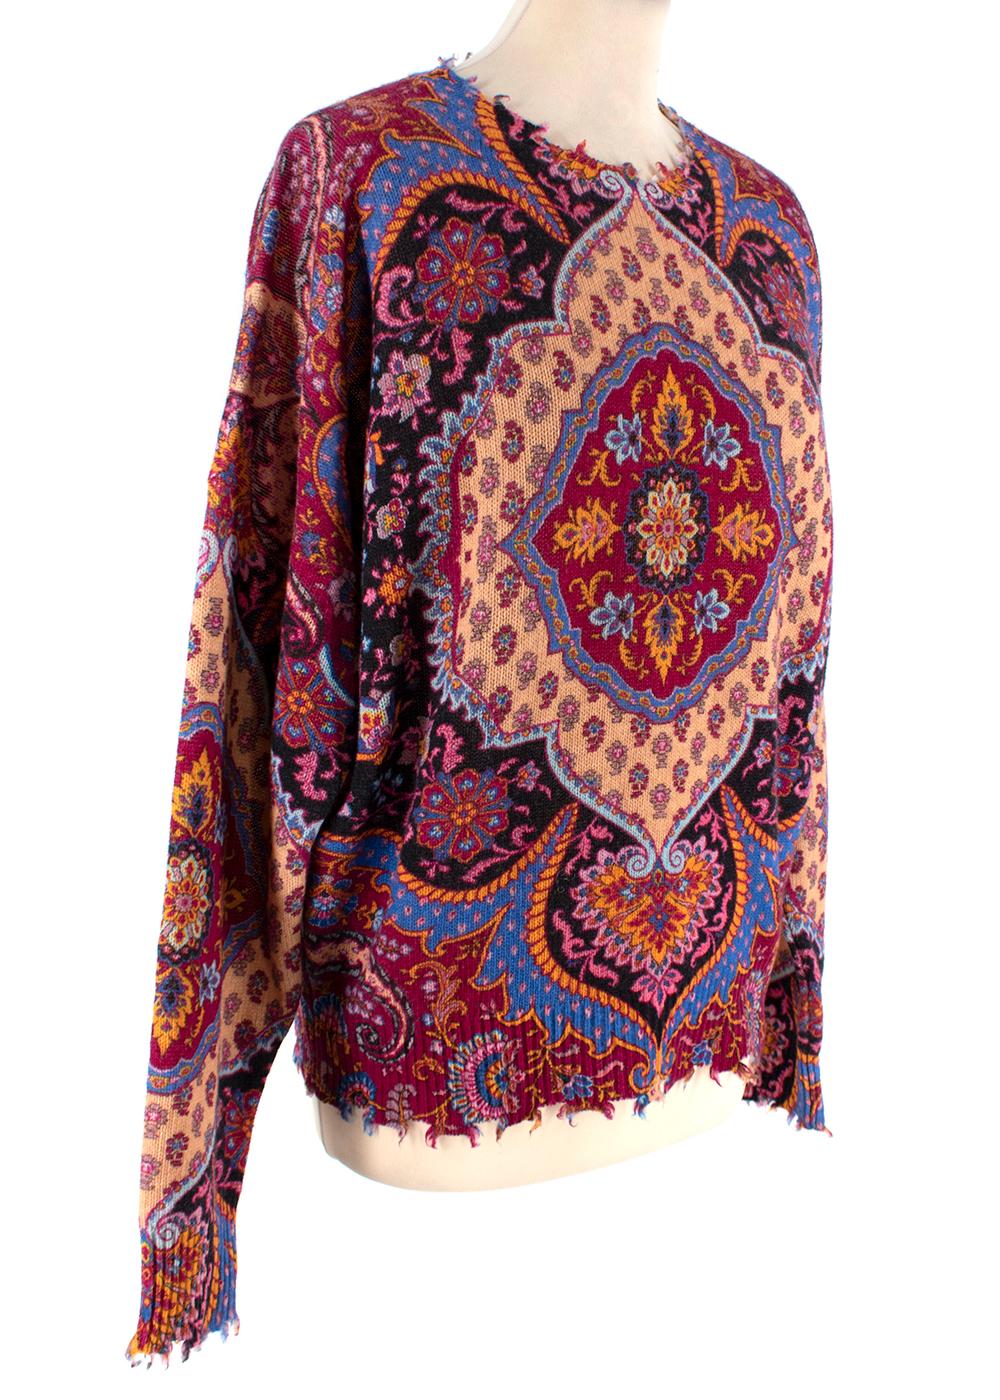 Etro Paisley Print Distressed Fine Knit Jumper

- Long sleeve fine knit woolen jumper, with signature Etro paisley print
- Distressed collar, cuffs and hemline 

Materials 
100% Wool 

Made in Italy
Dry clean only 

PLEASE NOTE, THESE ITEMS ARE